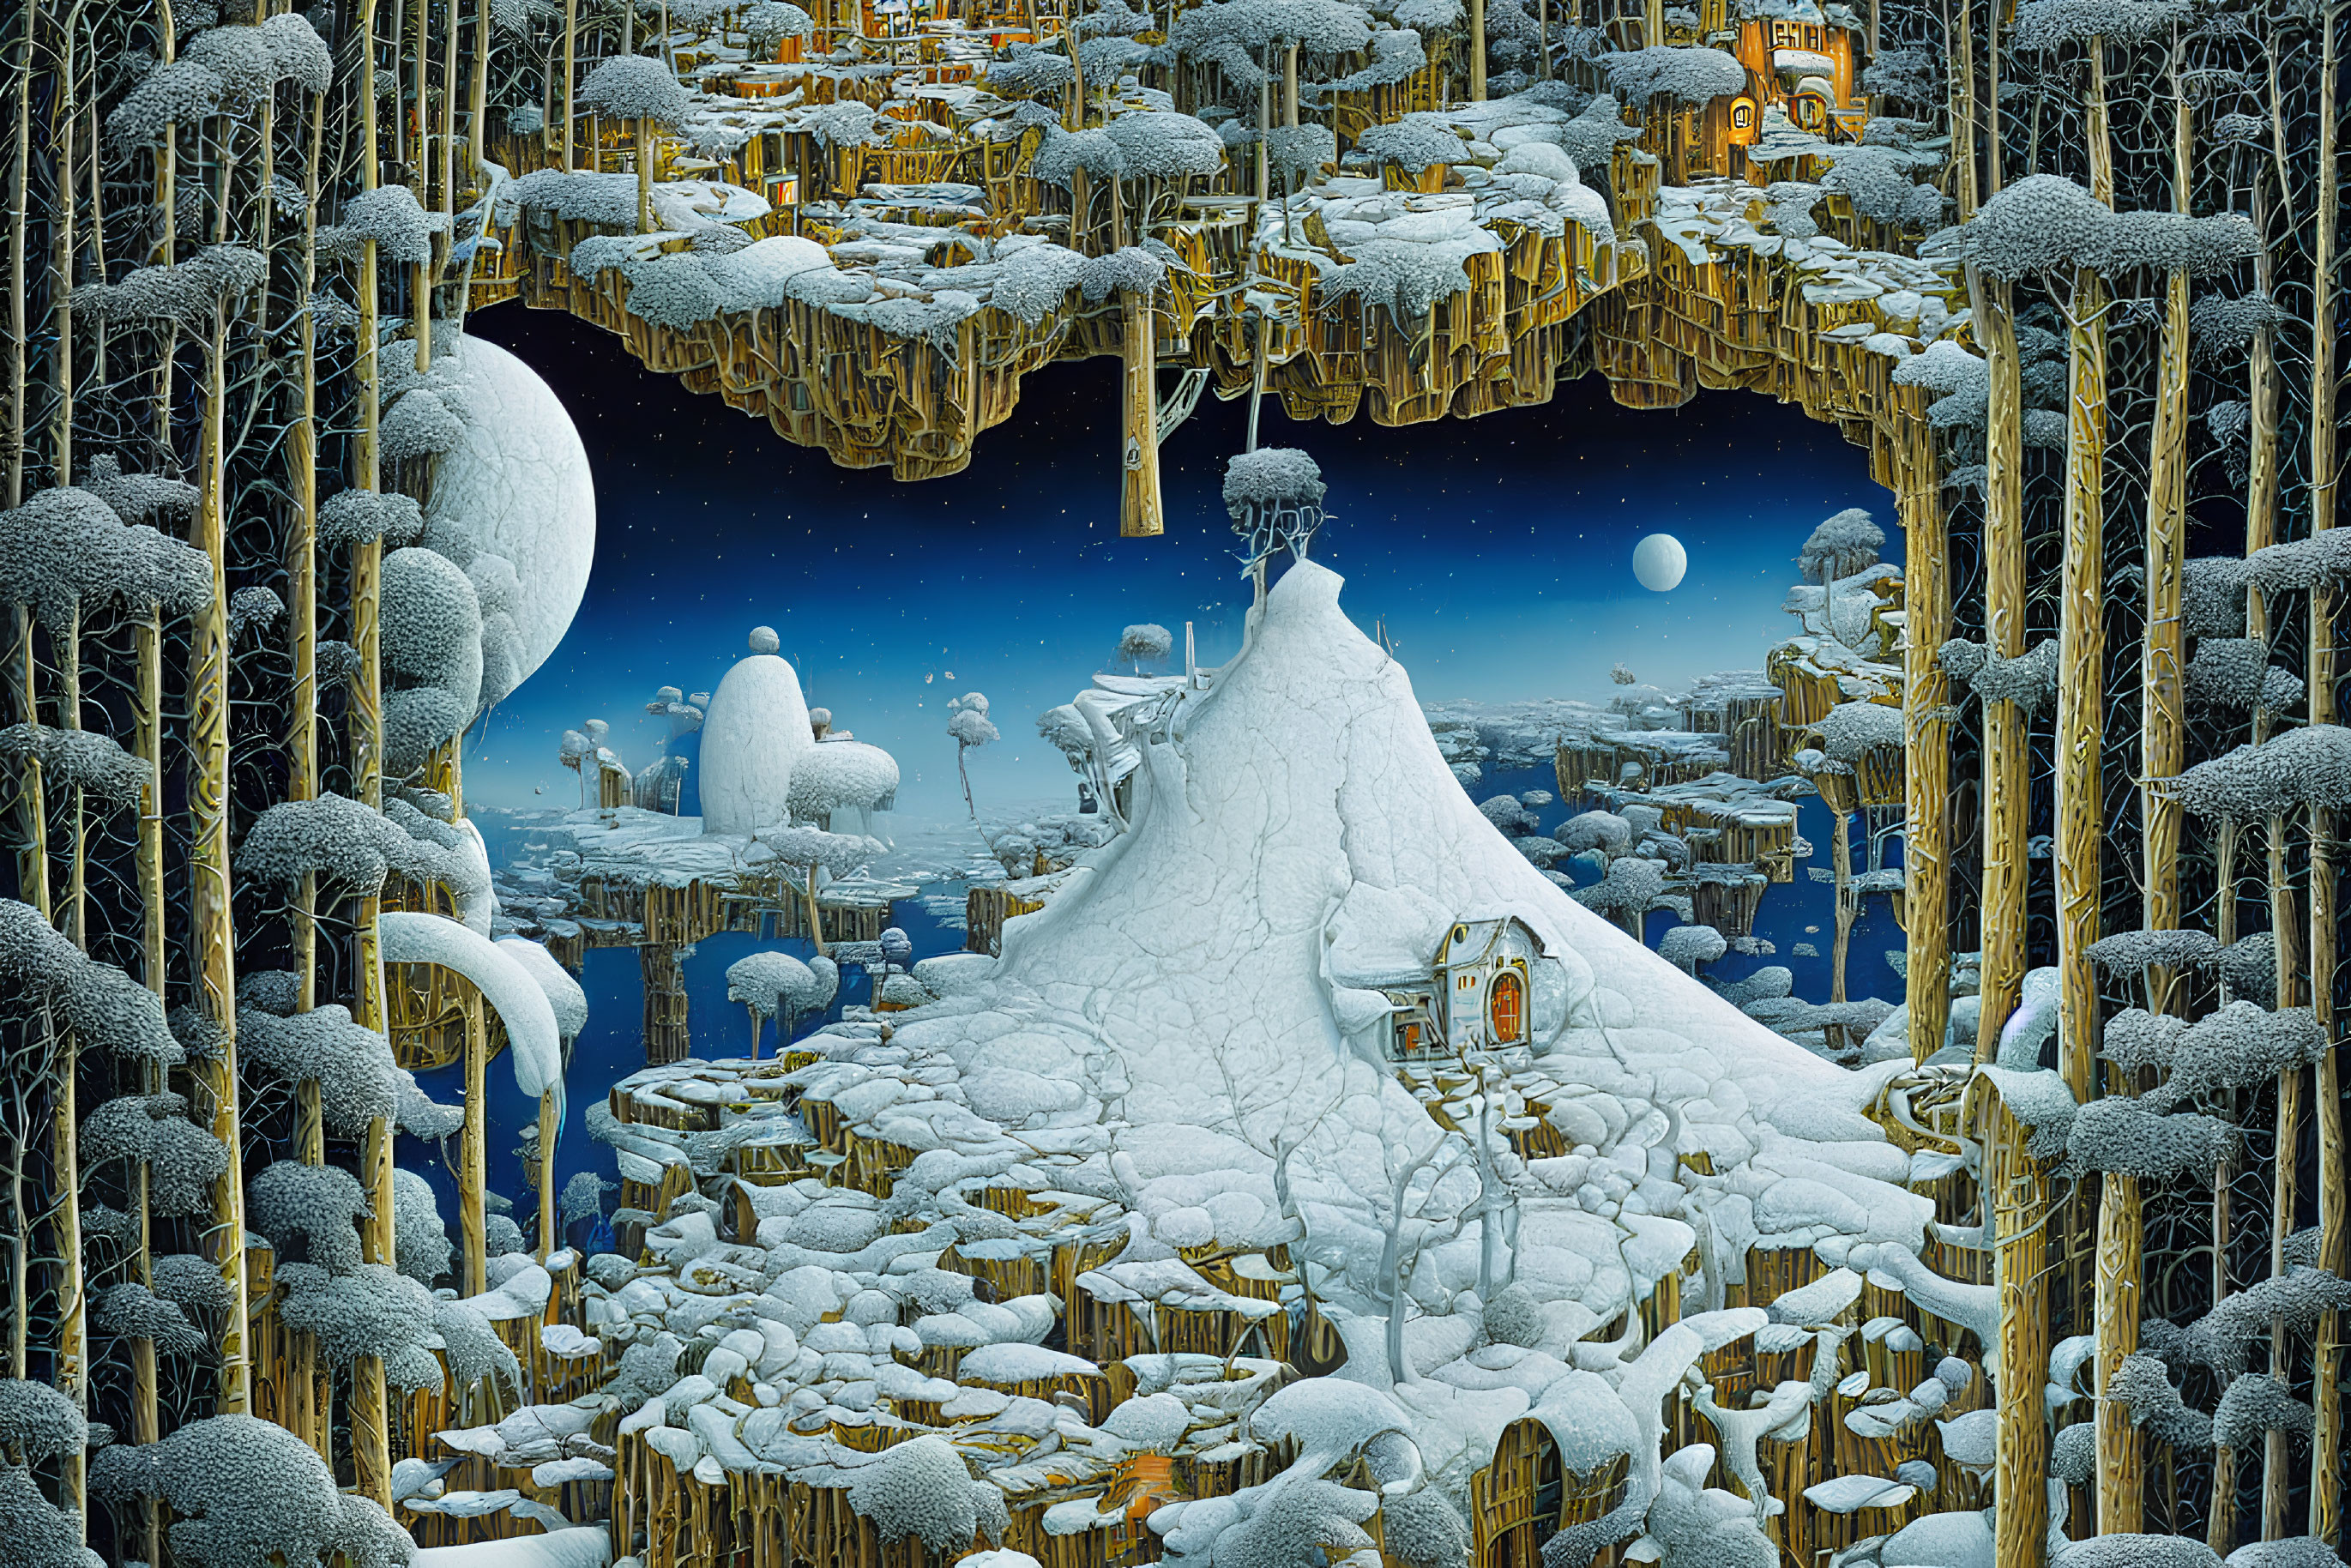 Snow-covered mountain in surreal winter landscape surrounded by intricate trees and buildings under multiple moons